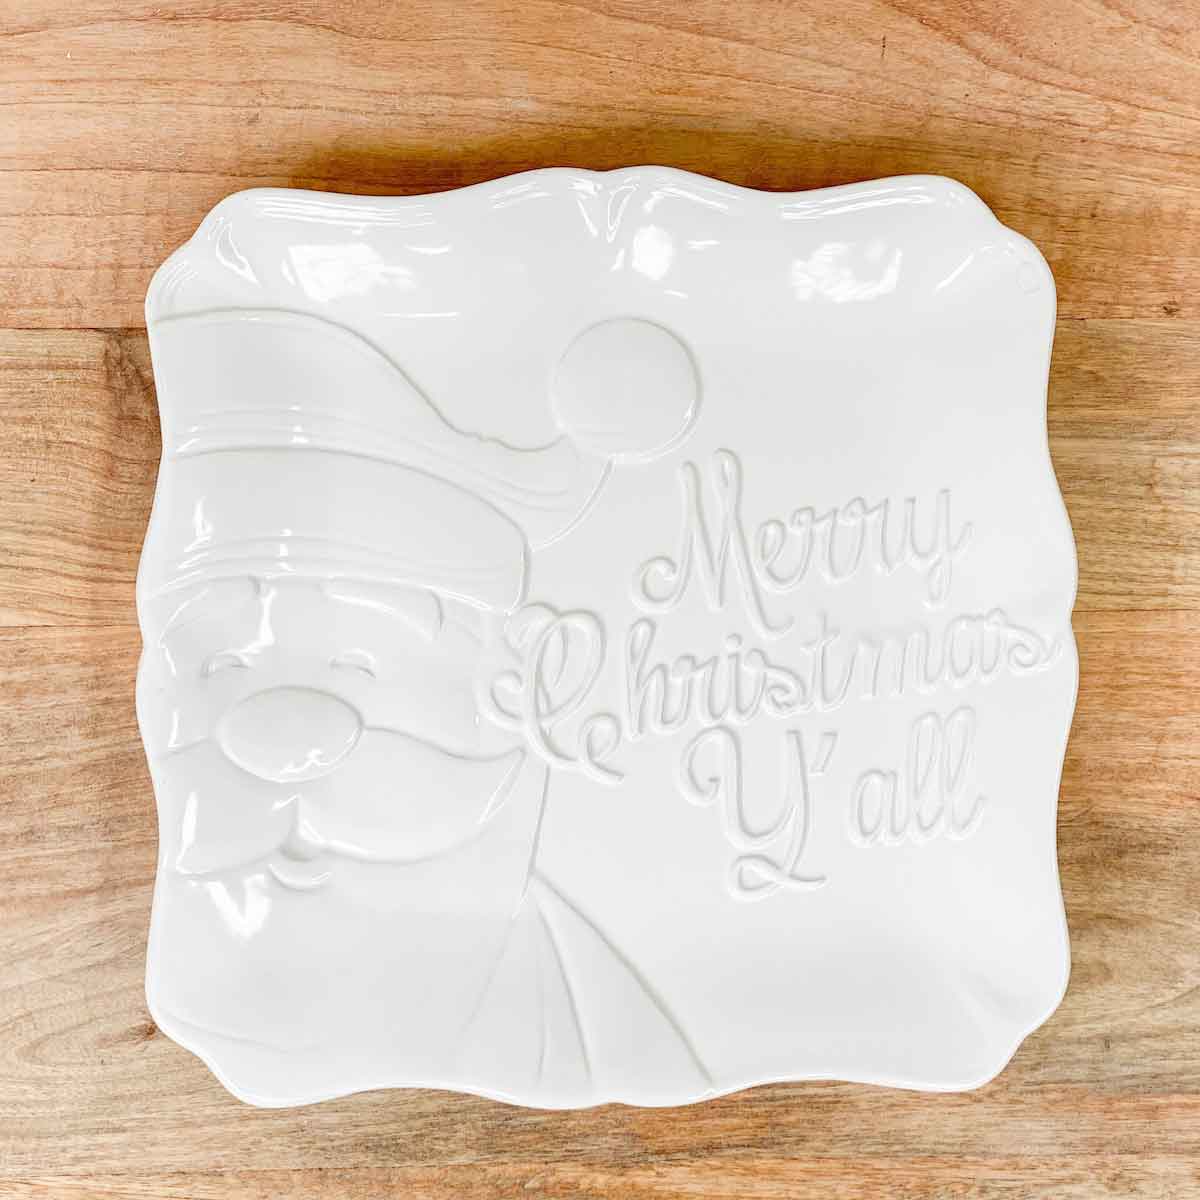 Merry Christmas Y'all White Embossed Square Platter